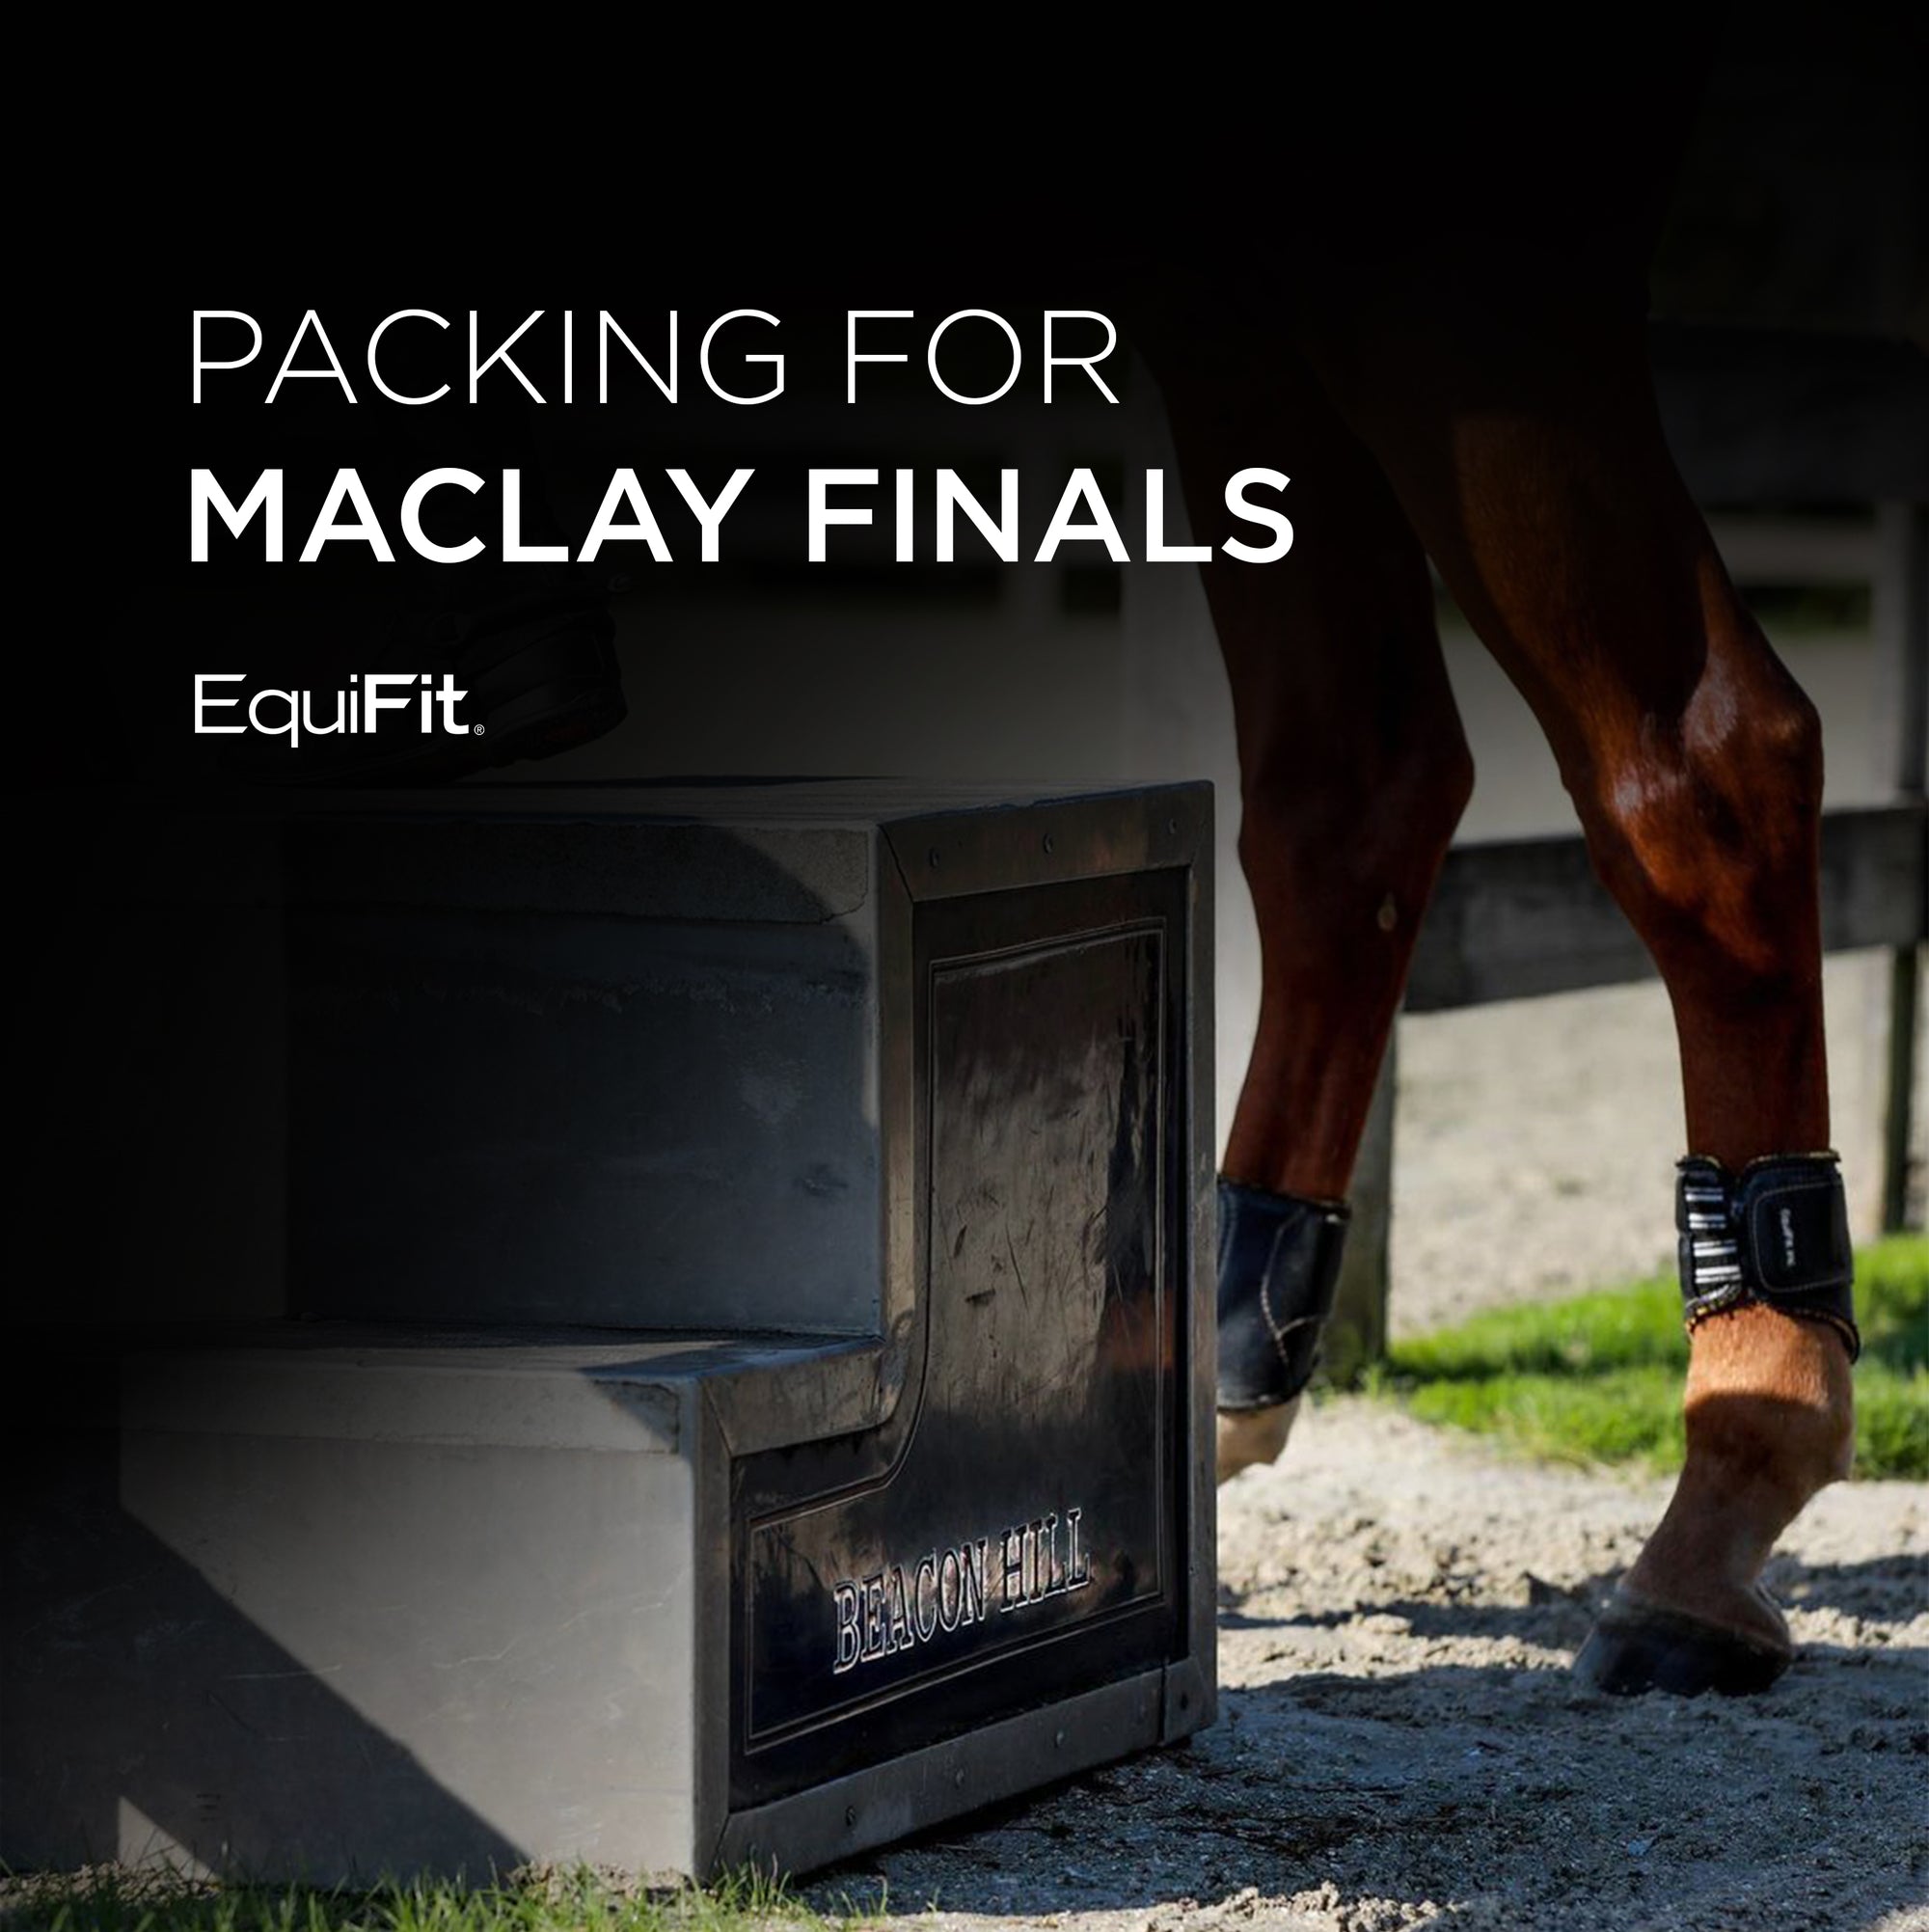 What Beacon Hill Is Packing for the Maclay Finals